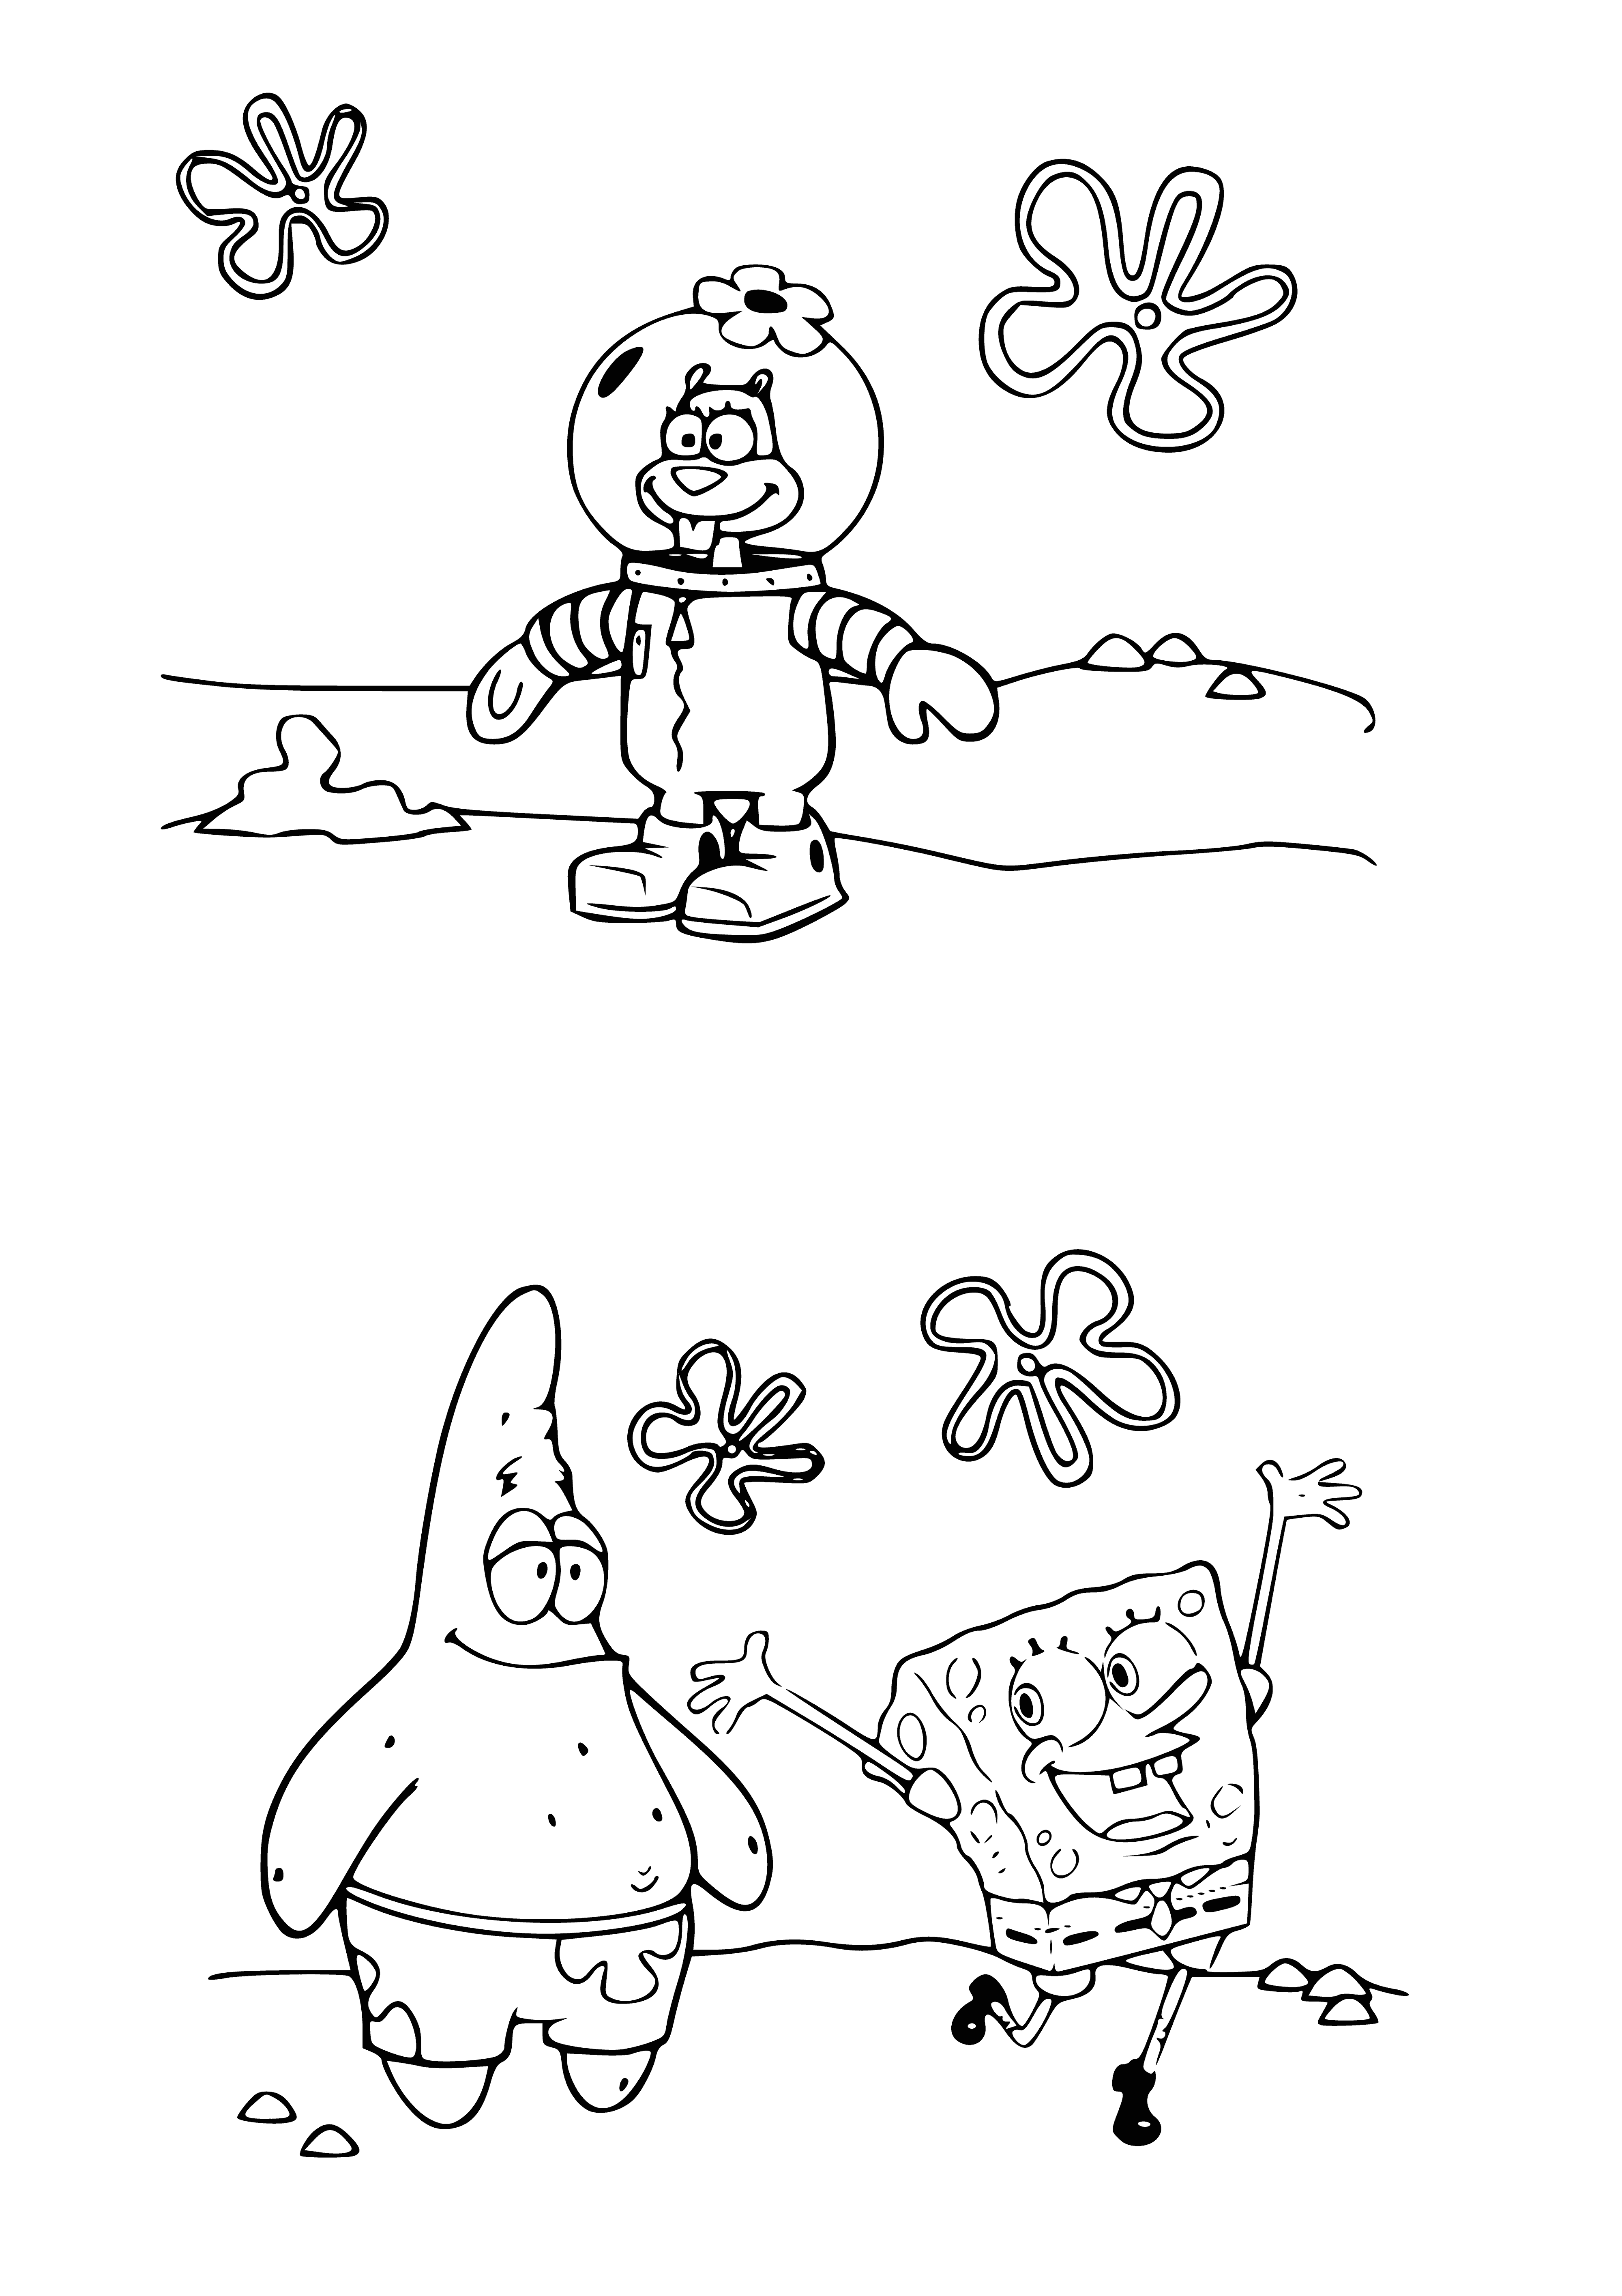 coloring page: SpongeBob, Patrick, Sandy, Squidward, & Gary are cartoon drawing pals in the center of the page.